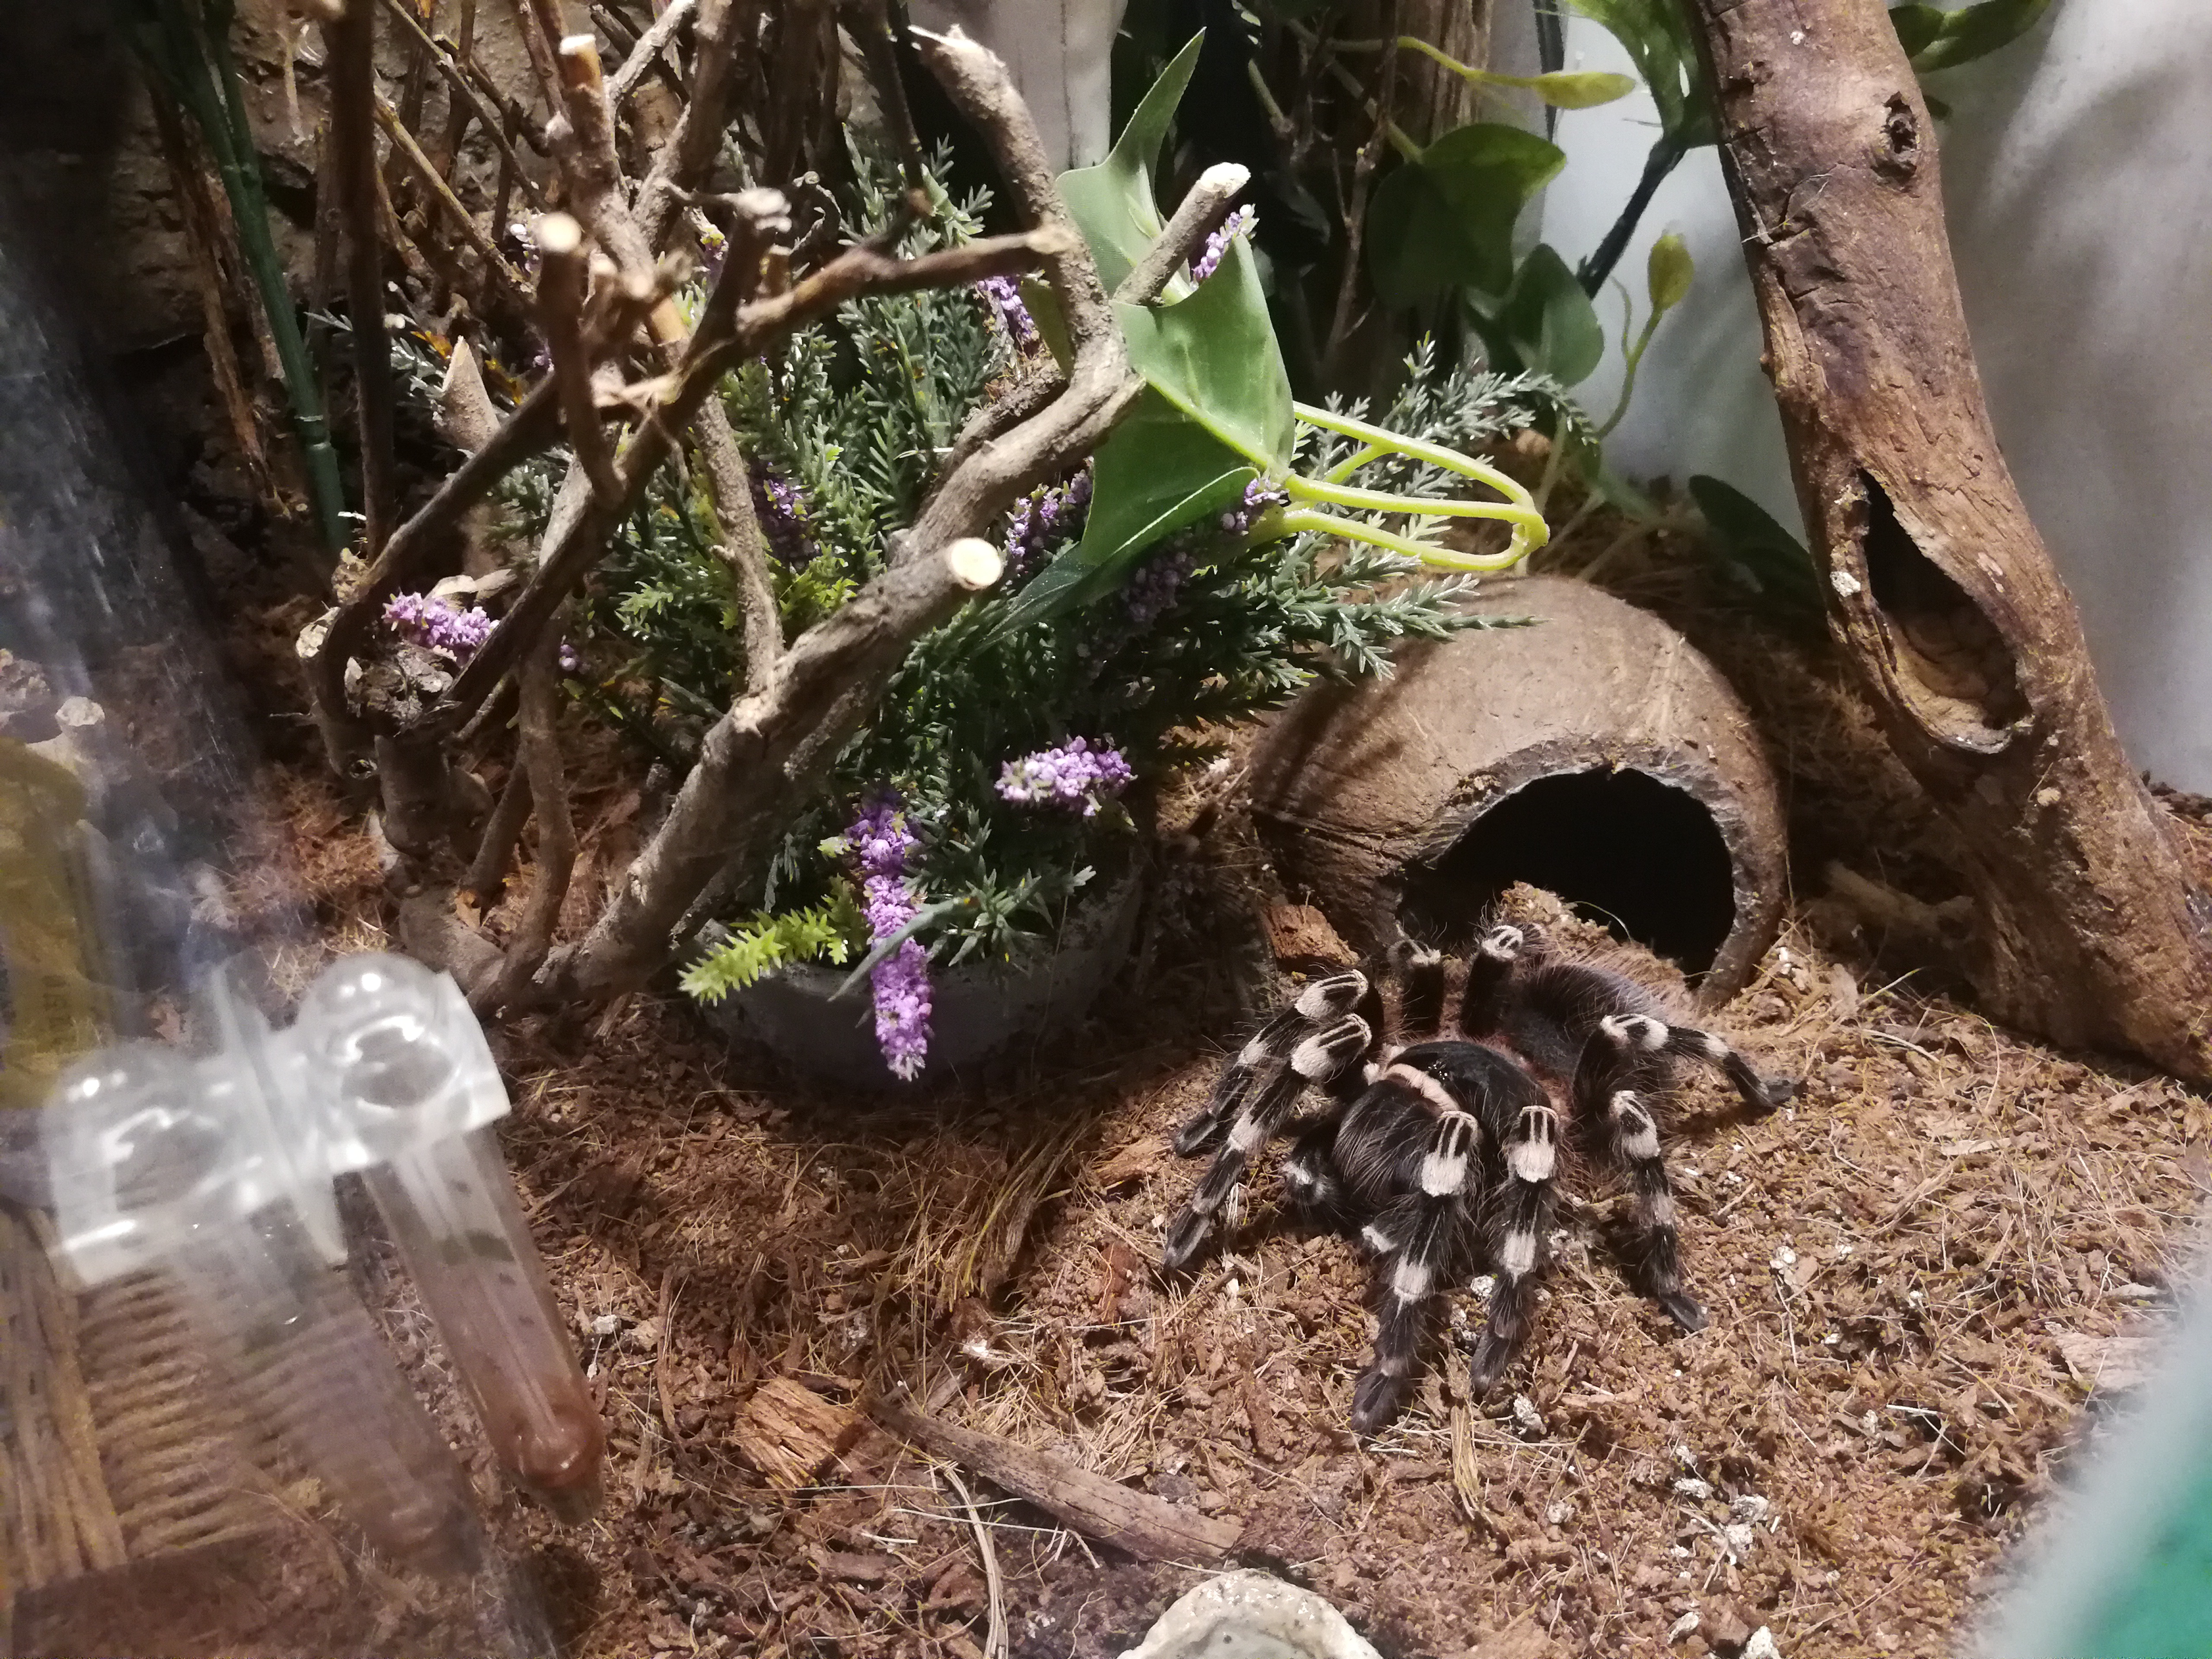 Freshly molted acanthoscurria geniculata.